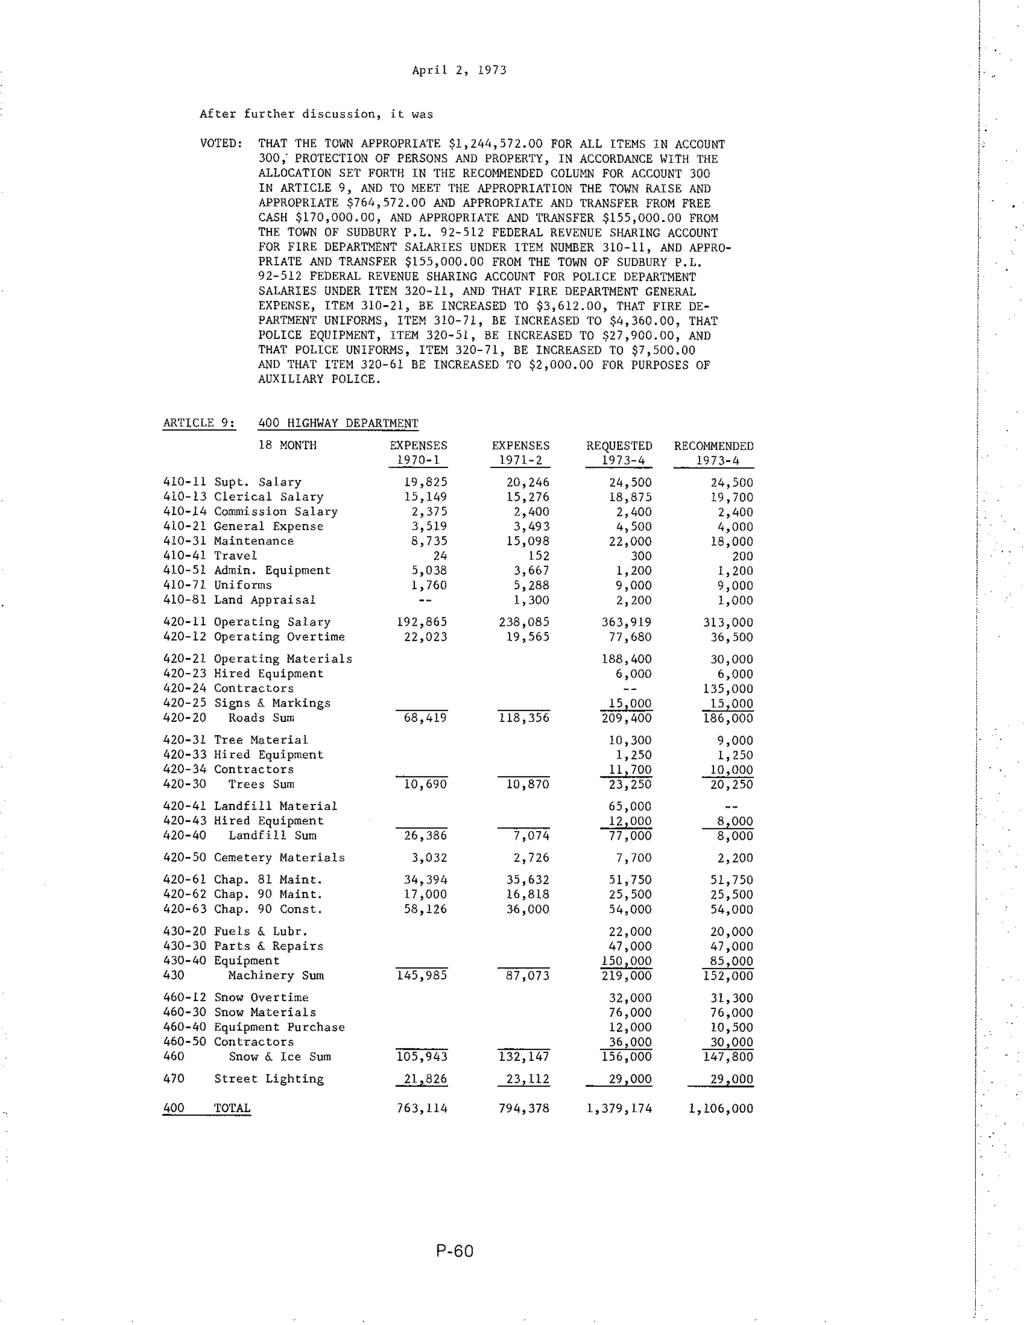 April 2, 1973 After further discussion, it was VOTED: THAT THE TO\.JN APPROPRIATE $1,244,572.